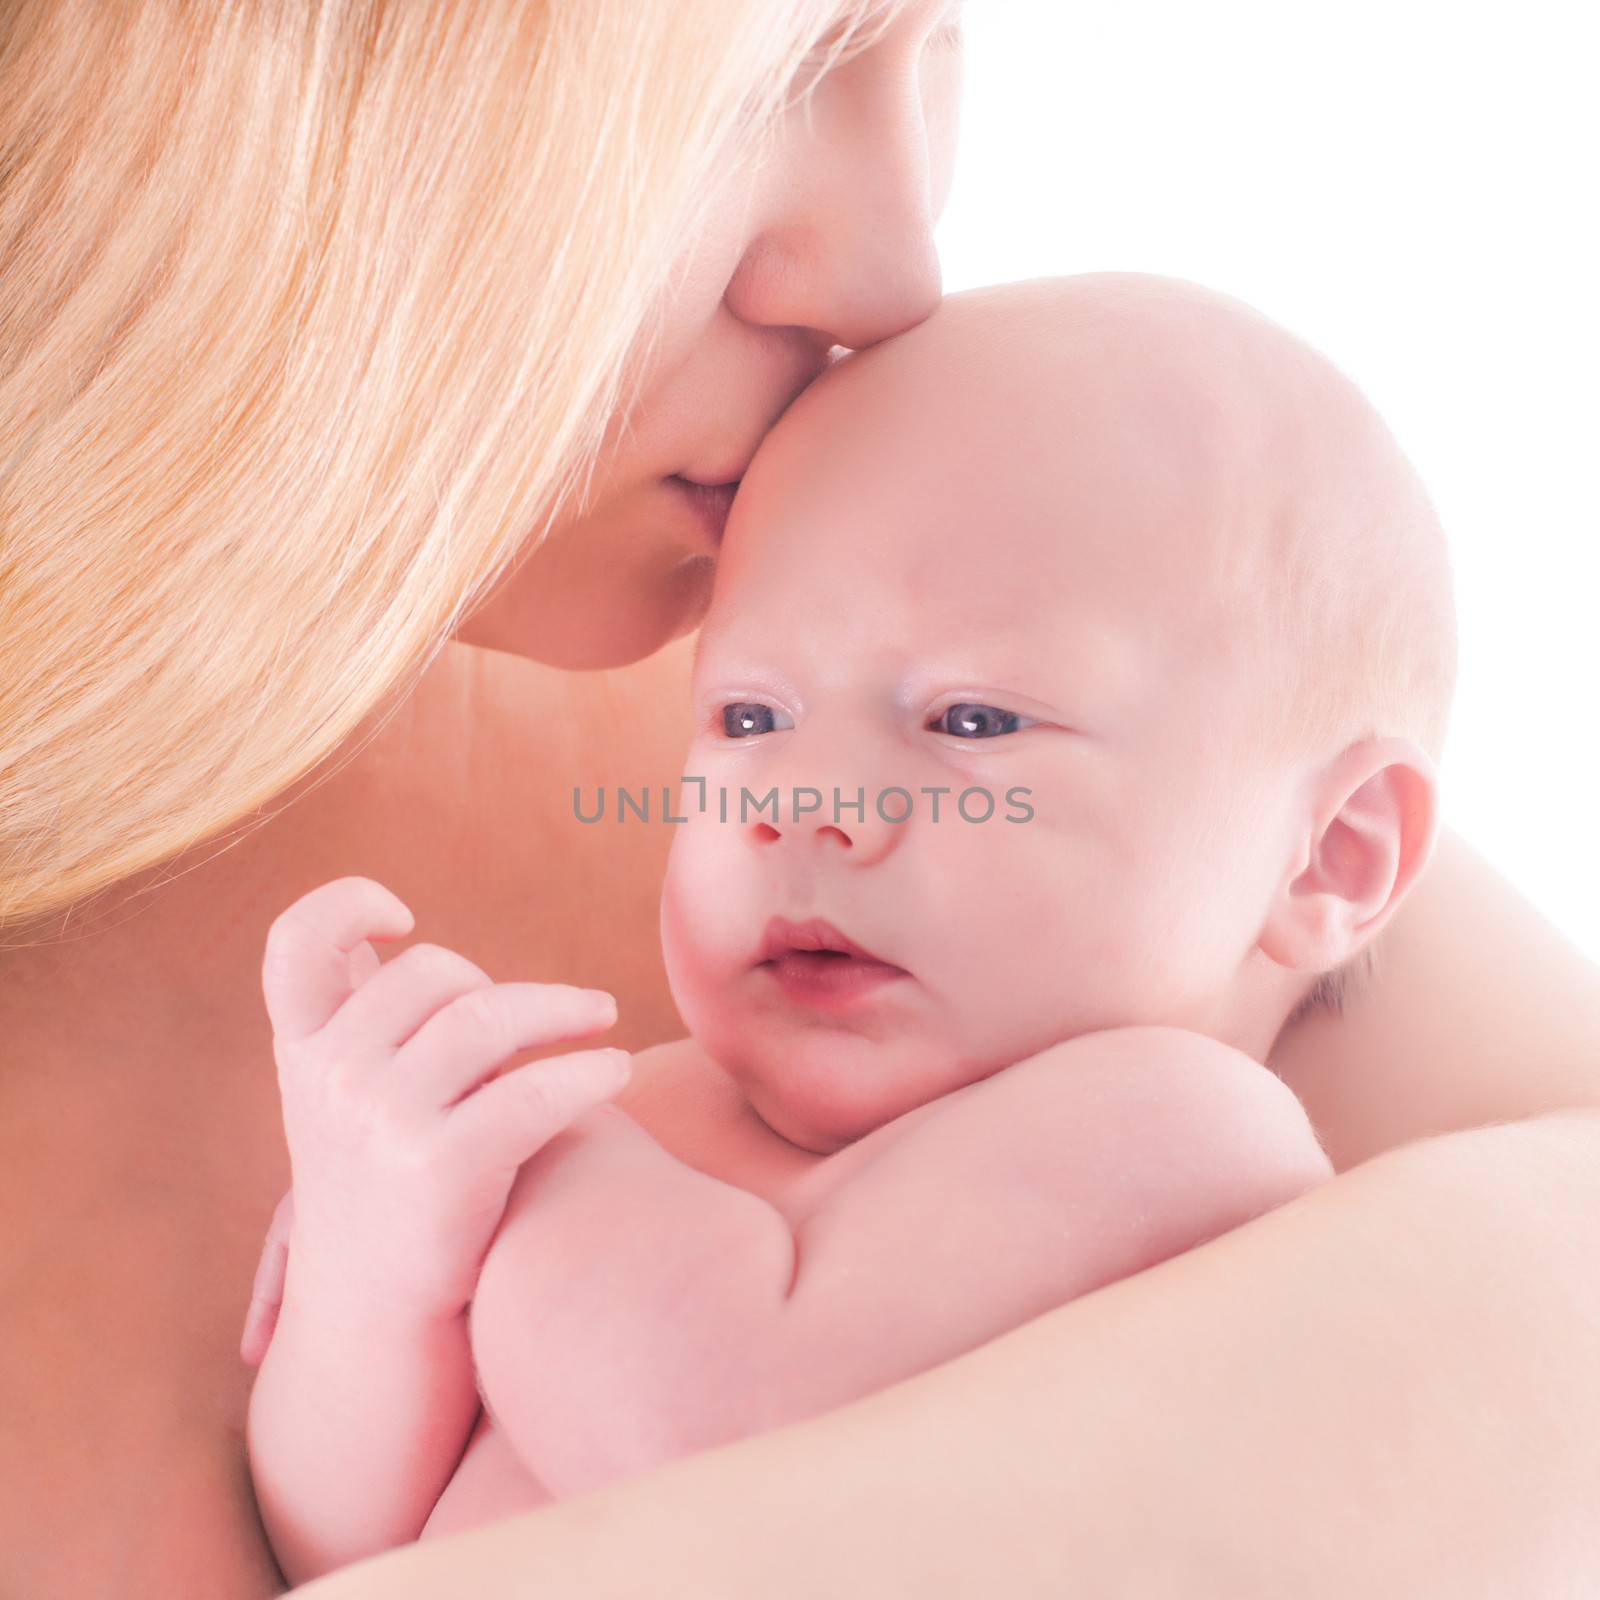 Mother kisses her baby, close up portrait